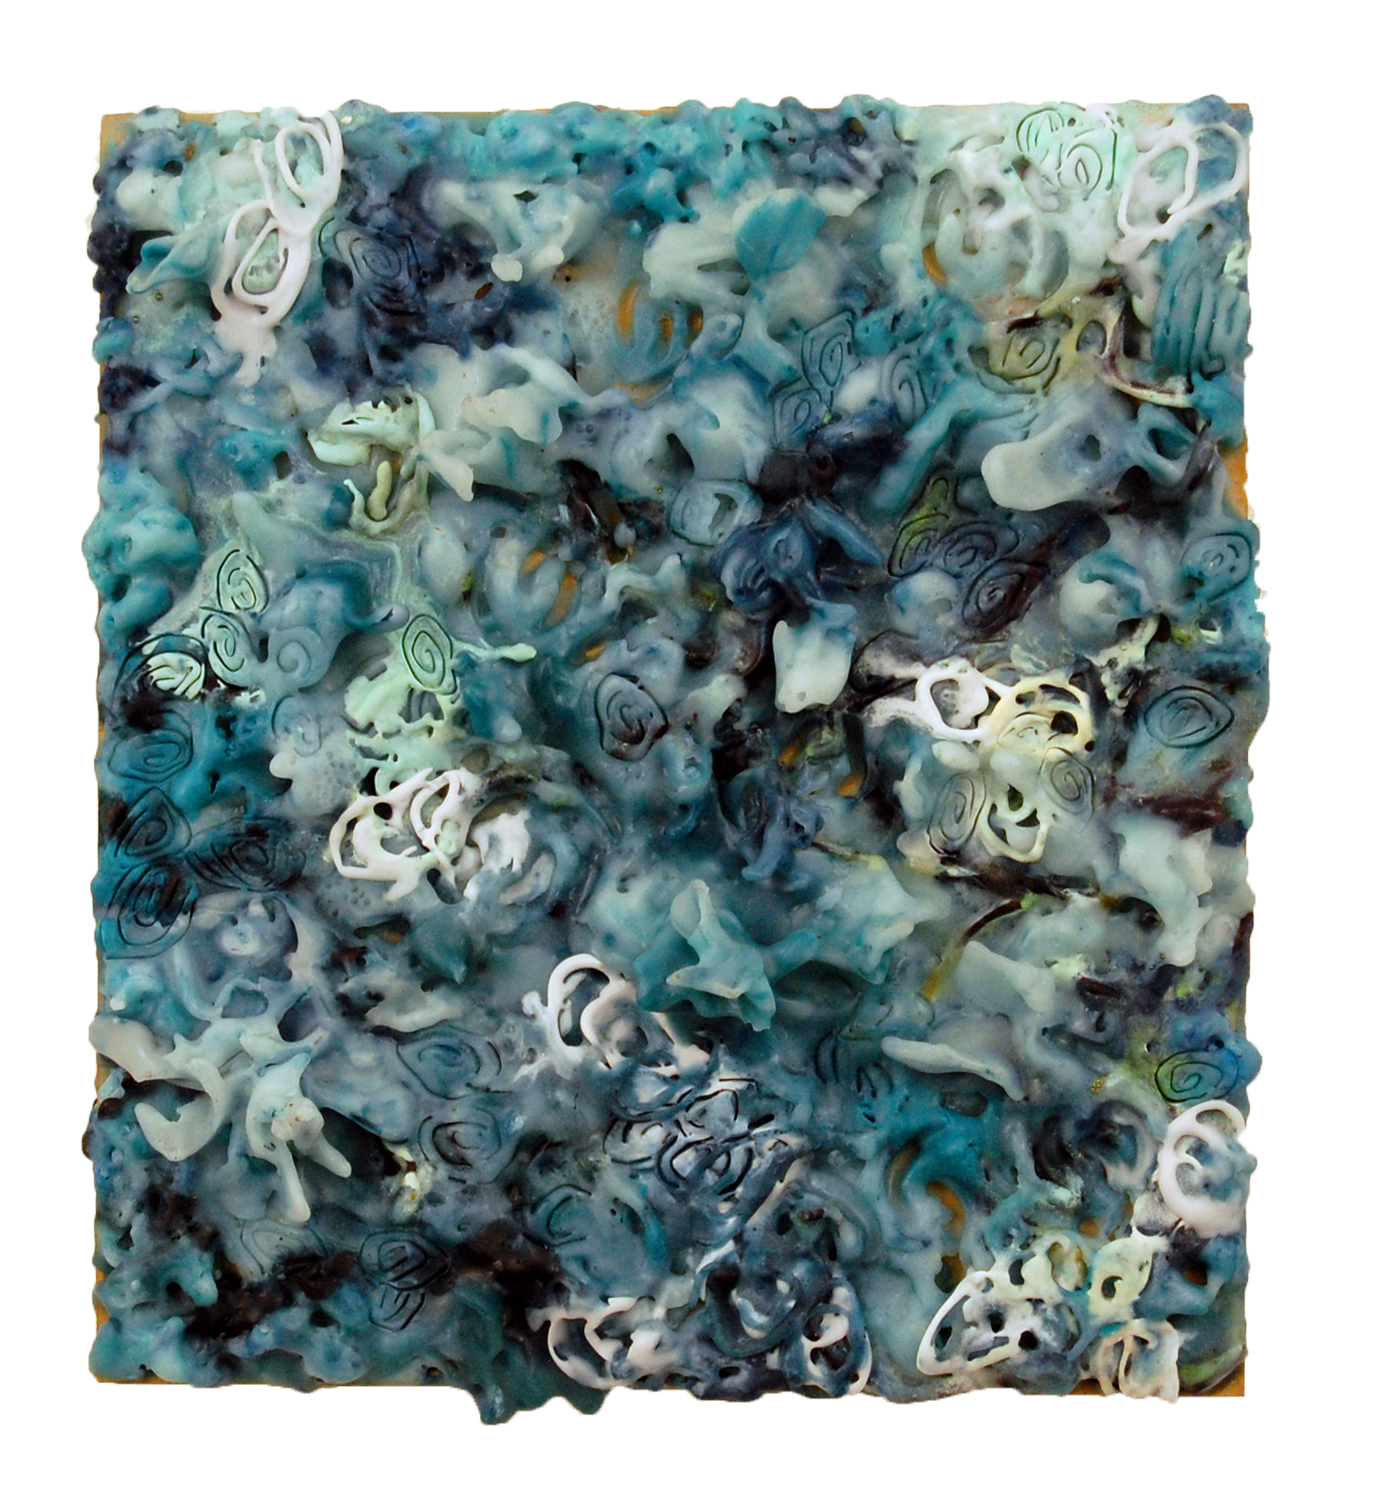 Sea Cells and Flowers, 2012, encaustic on panel, 8 x 9 inches